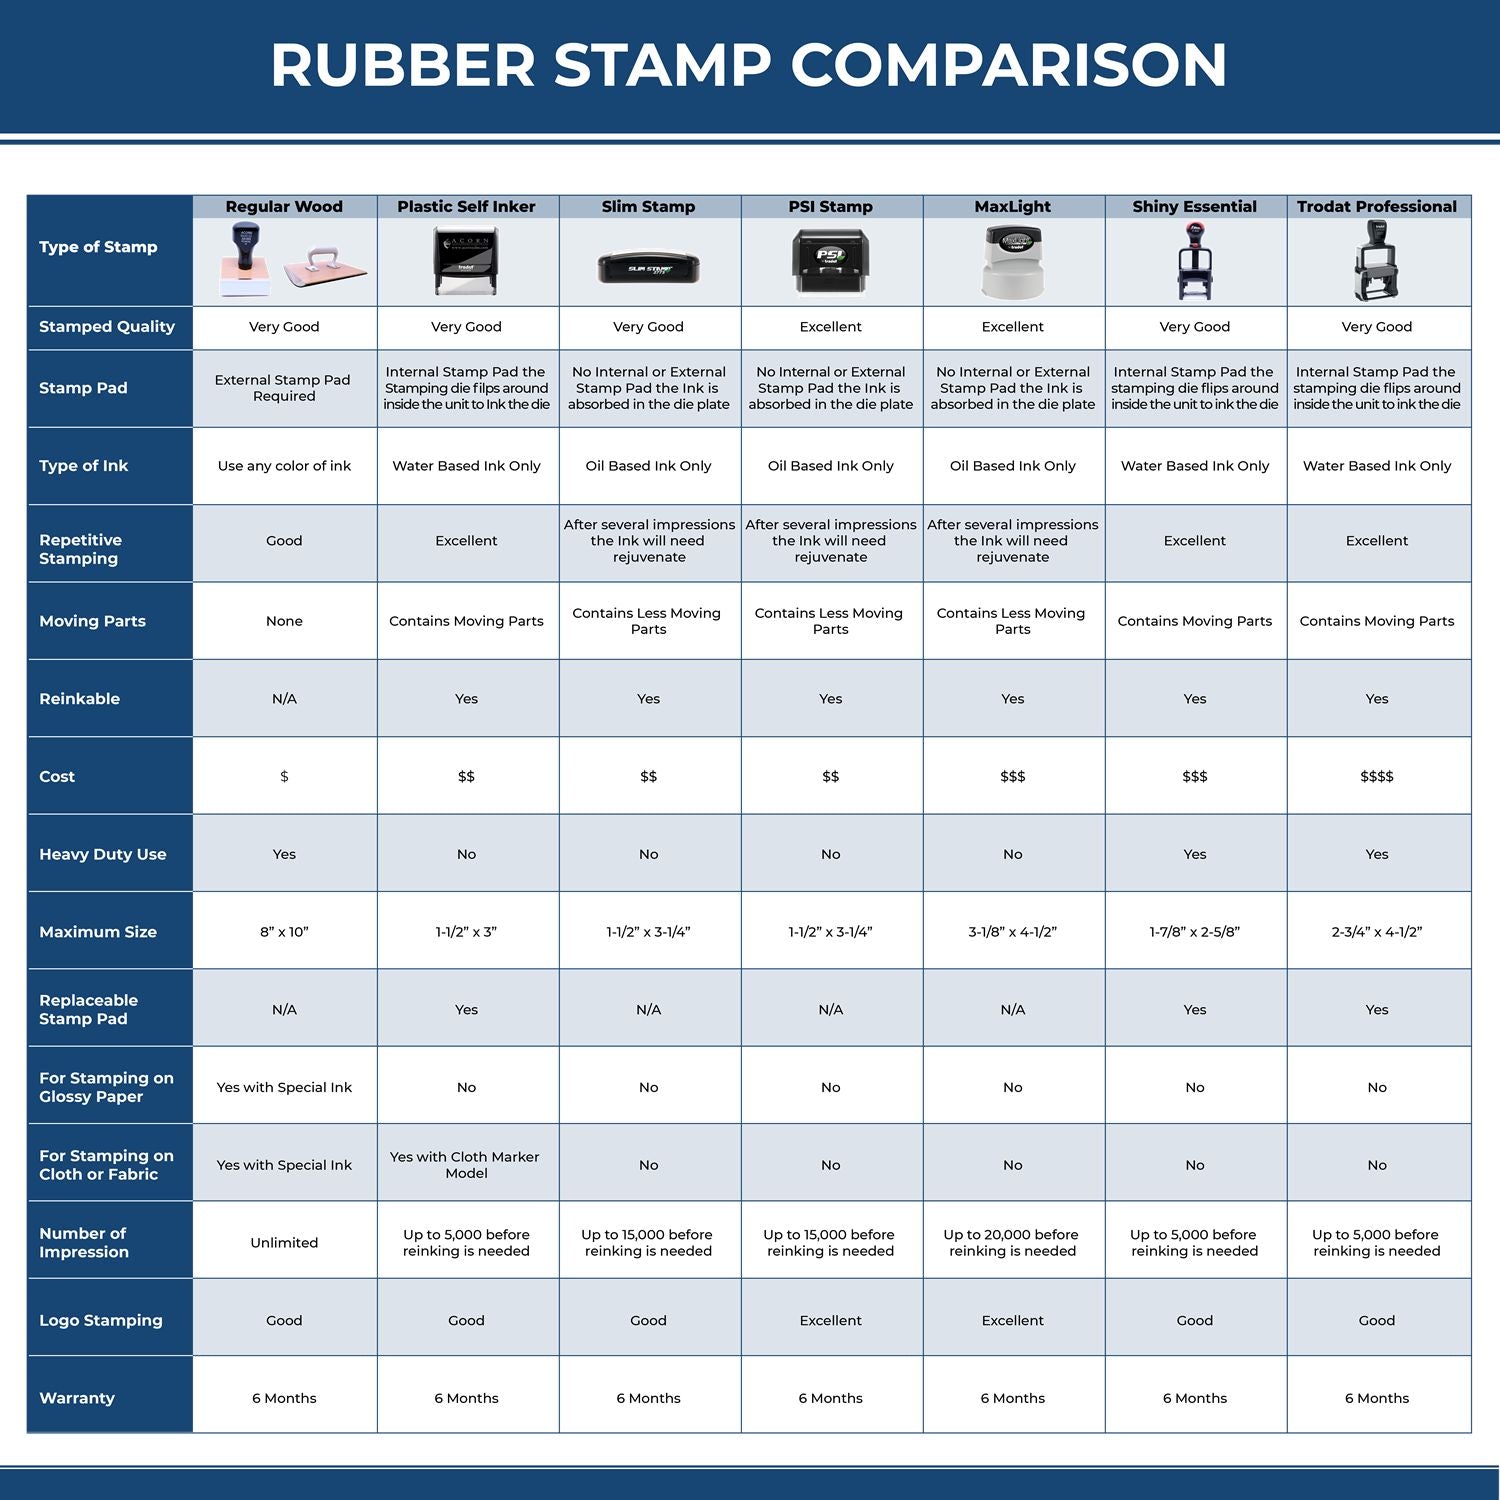 A comparison chart for the different types of mount models available for the Premium MaxLight Pre-Inked Puerto Rico Engineering Stamp.